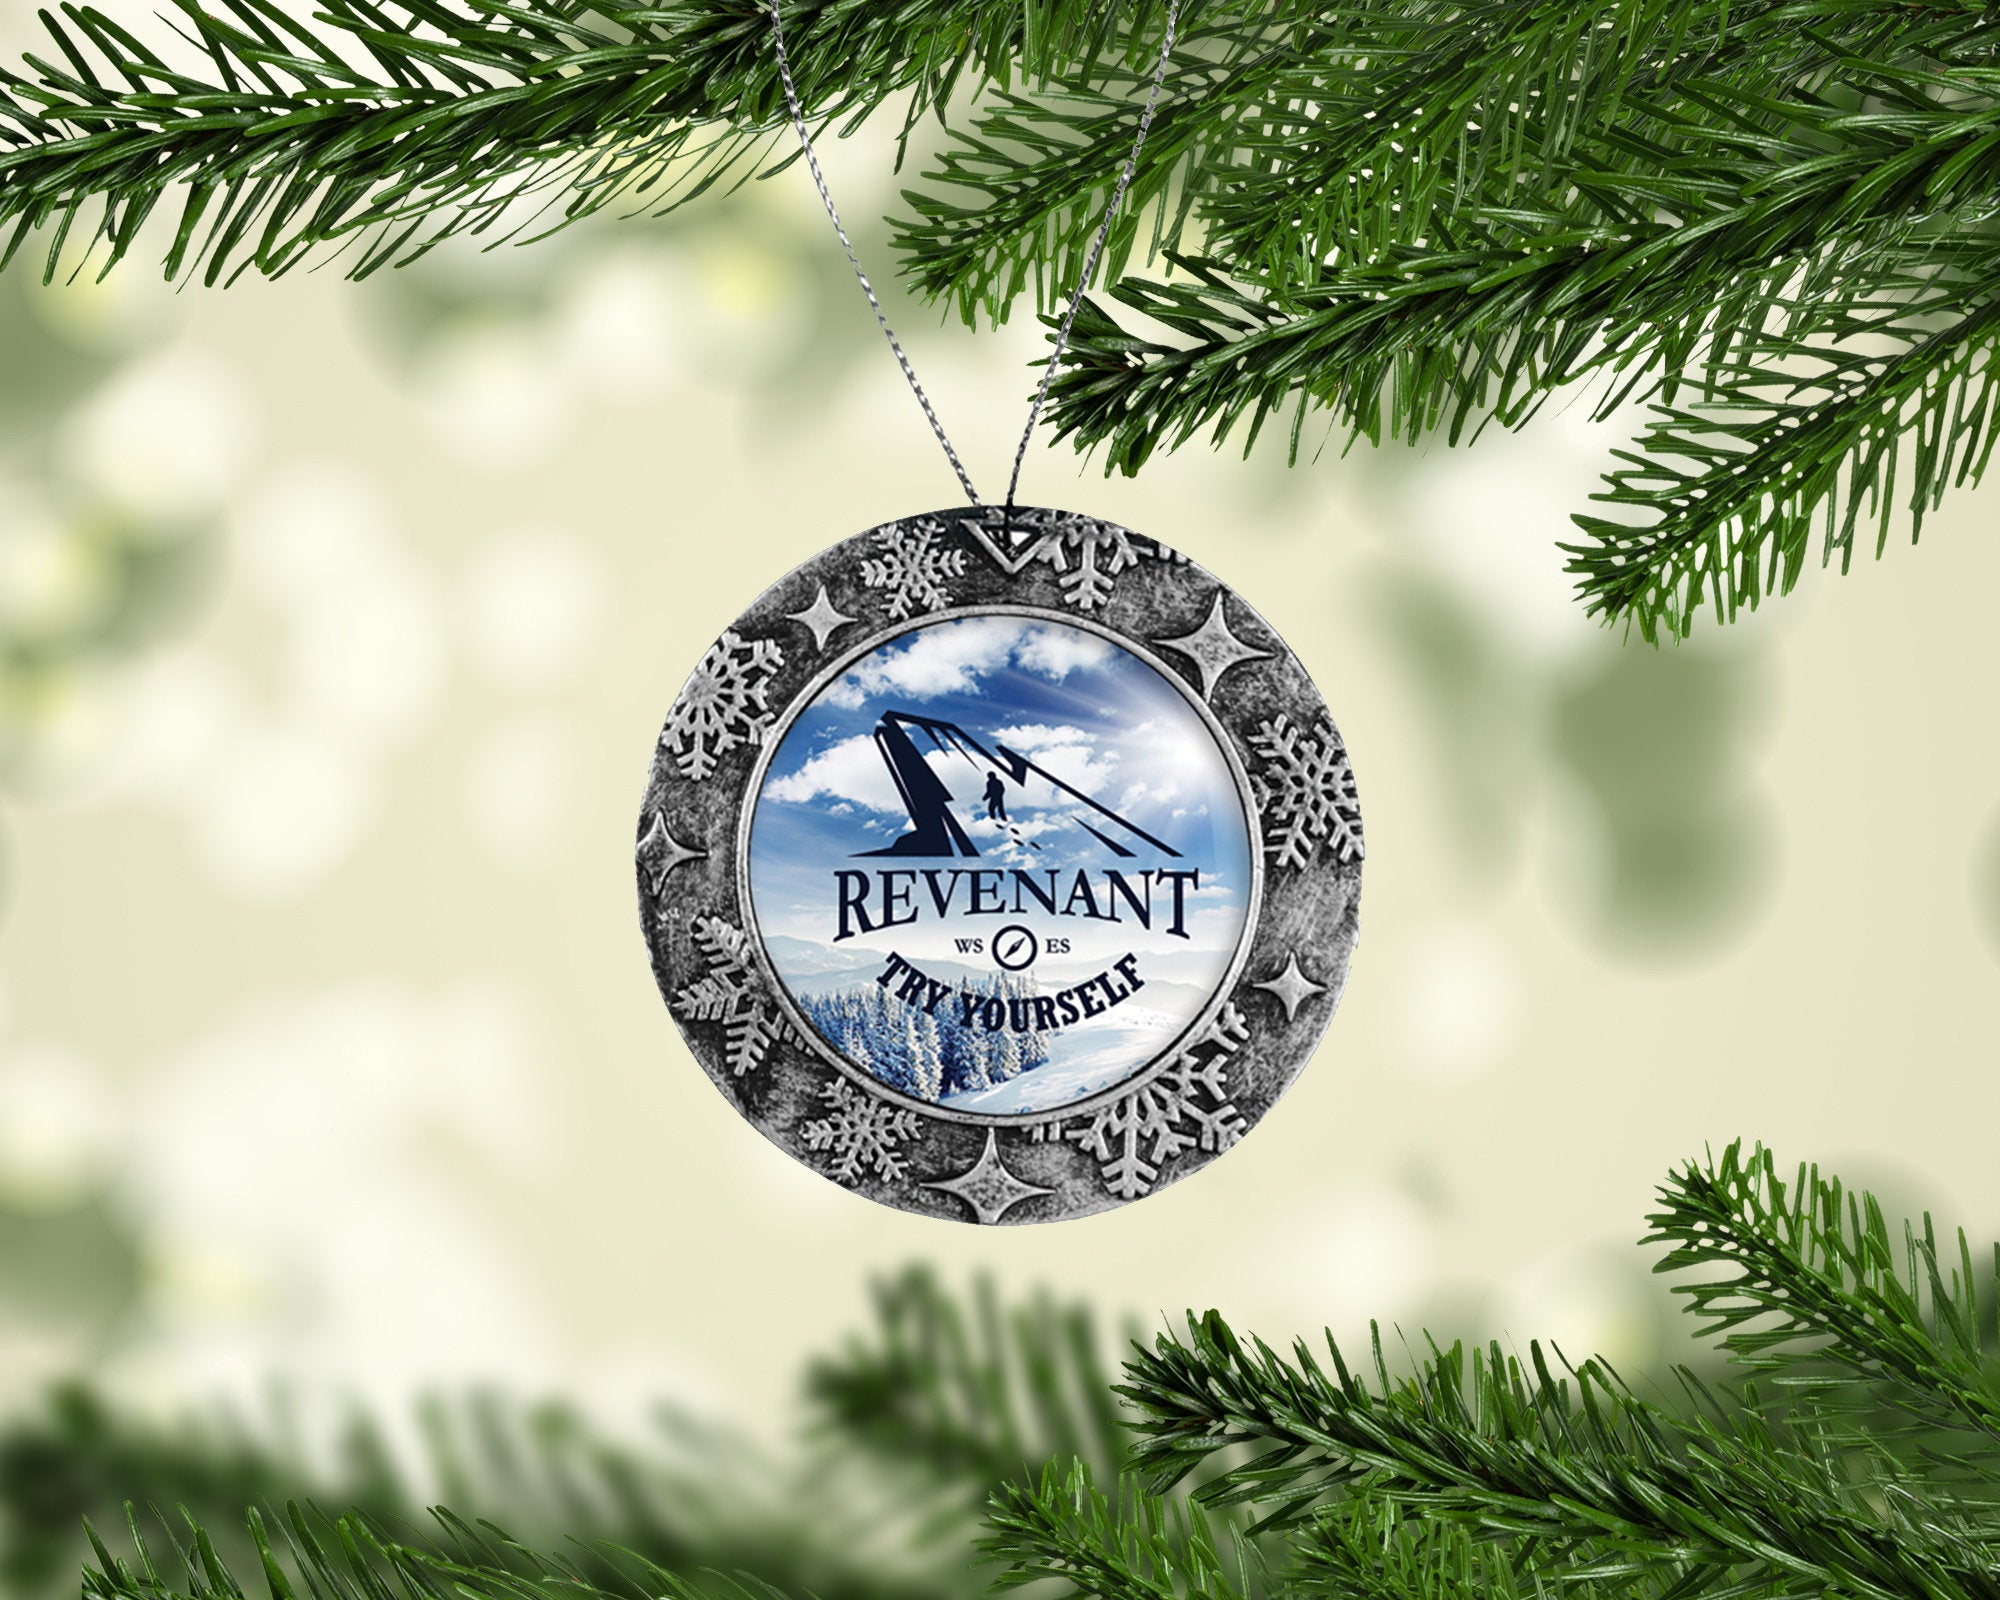 Personalized Christmas Silver Circle Ornament - Christmas Photo Antq. Silver Ornament - Custom Photo Ornament - Add Your Own Photo & Text